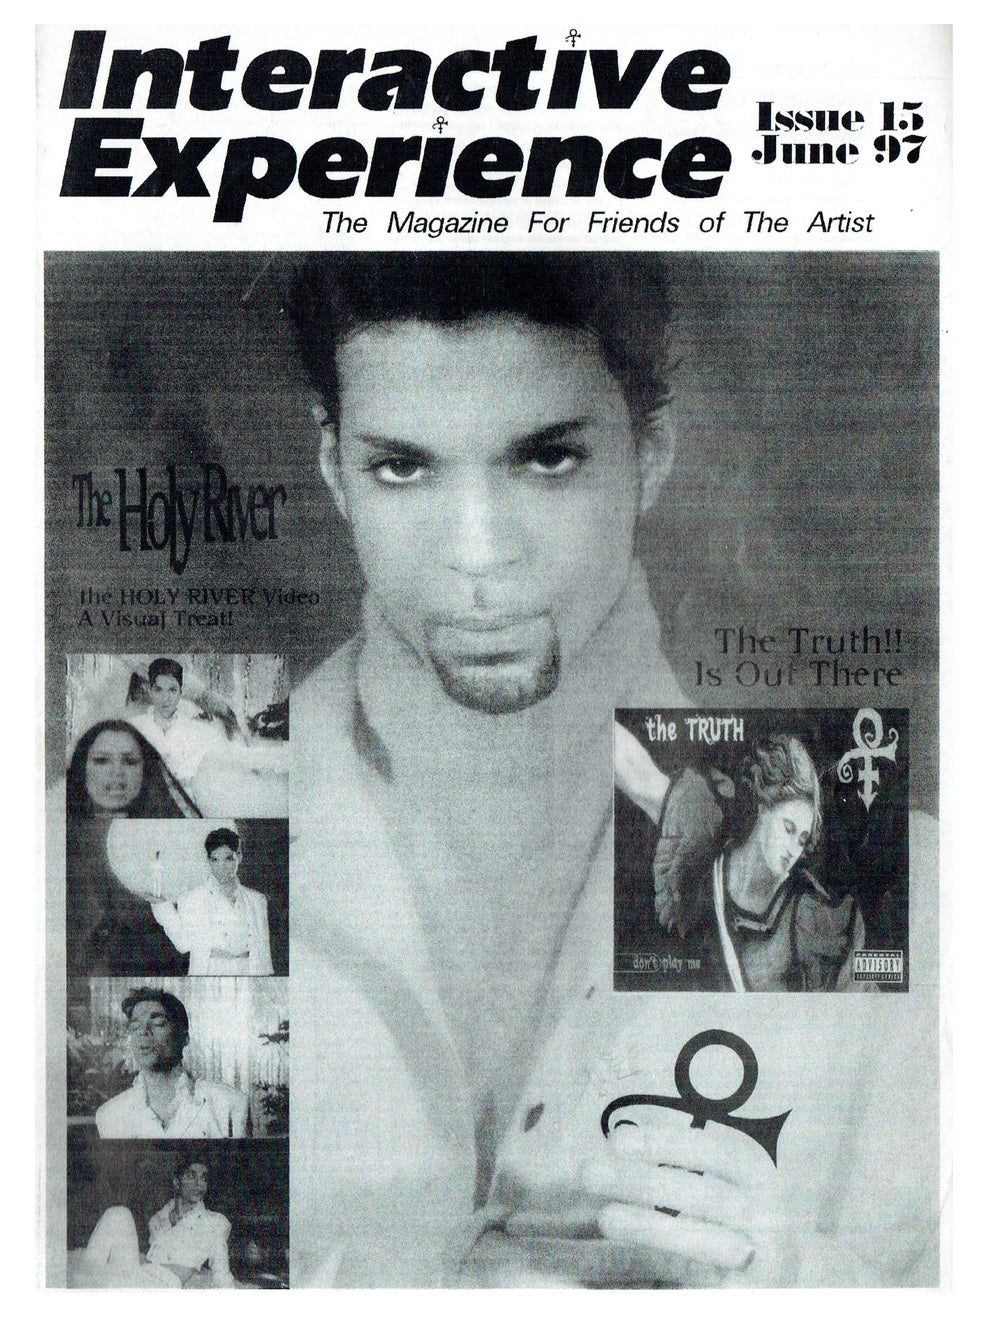 Prince – Interactive Experience Prince Fanzine Publication Issue 15 June 1997